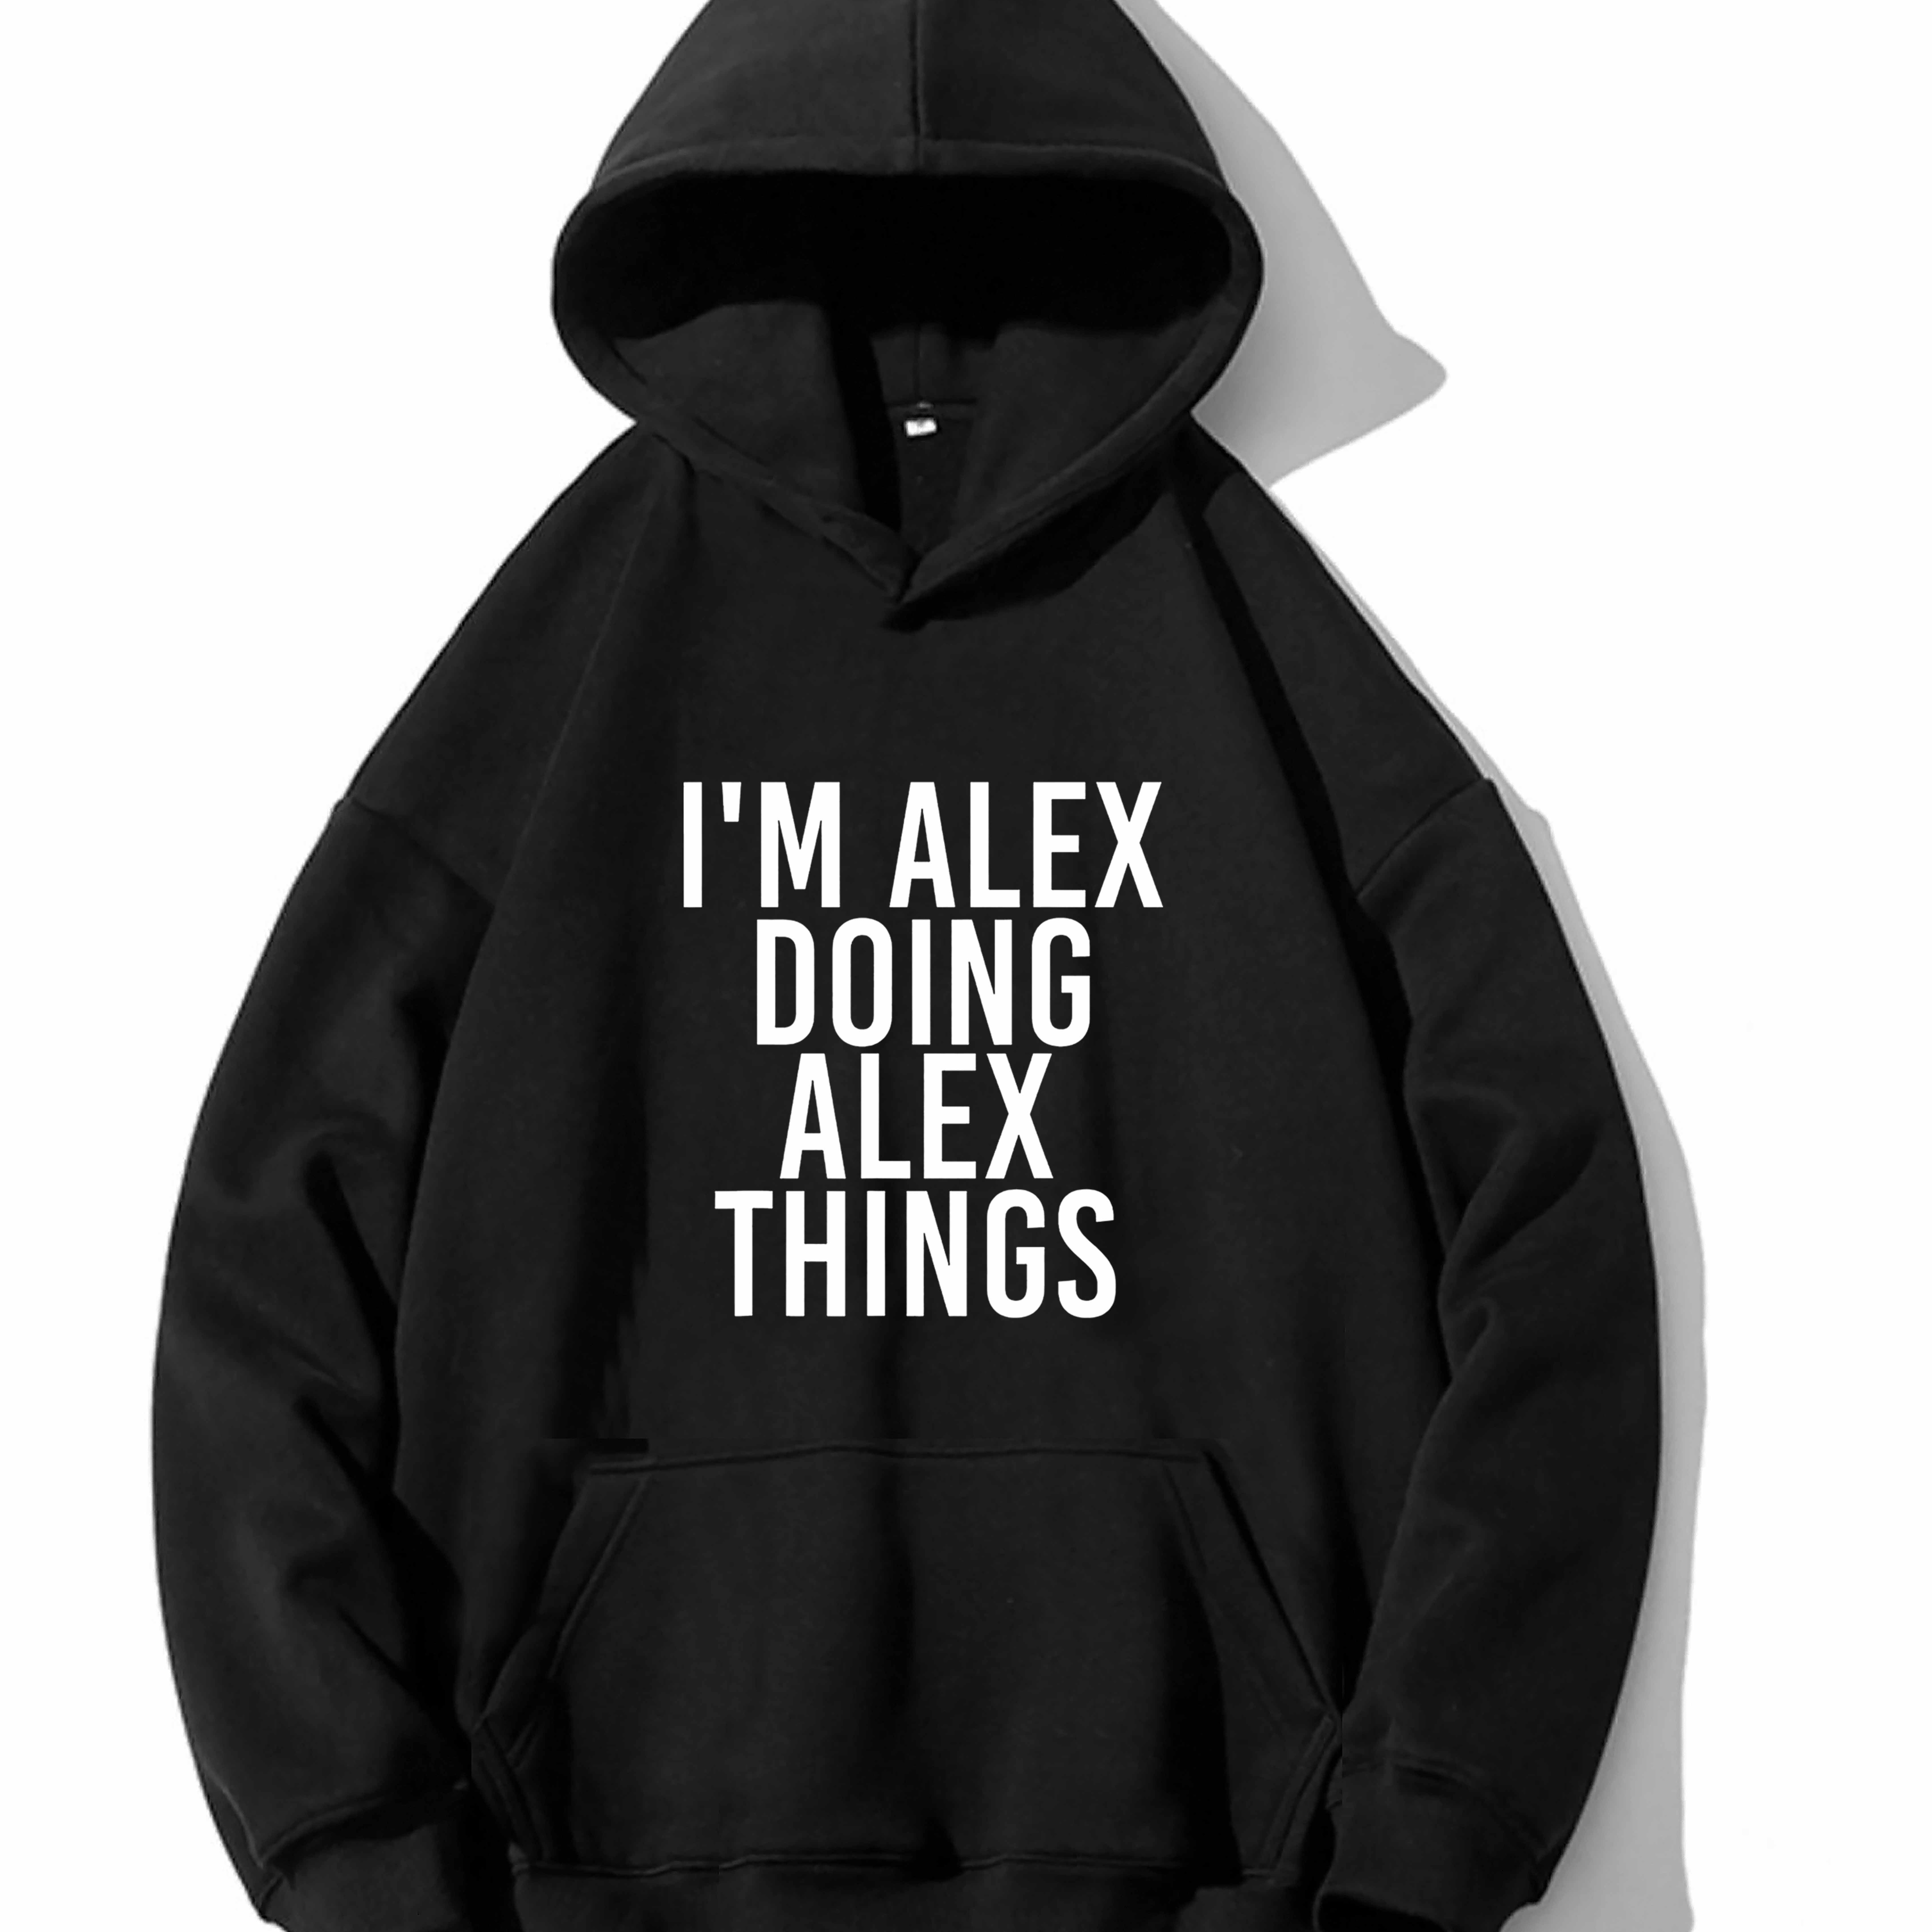 

Hoodies For Men, 'doing Alex Things' Hoodie, Men’s Casual Pullover Hooded Sweatshirt With Kangaroo Pocket For Spring Fall, As Gifts